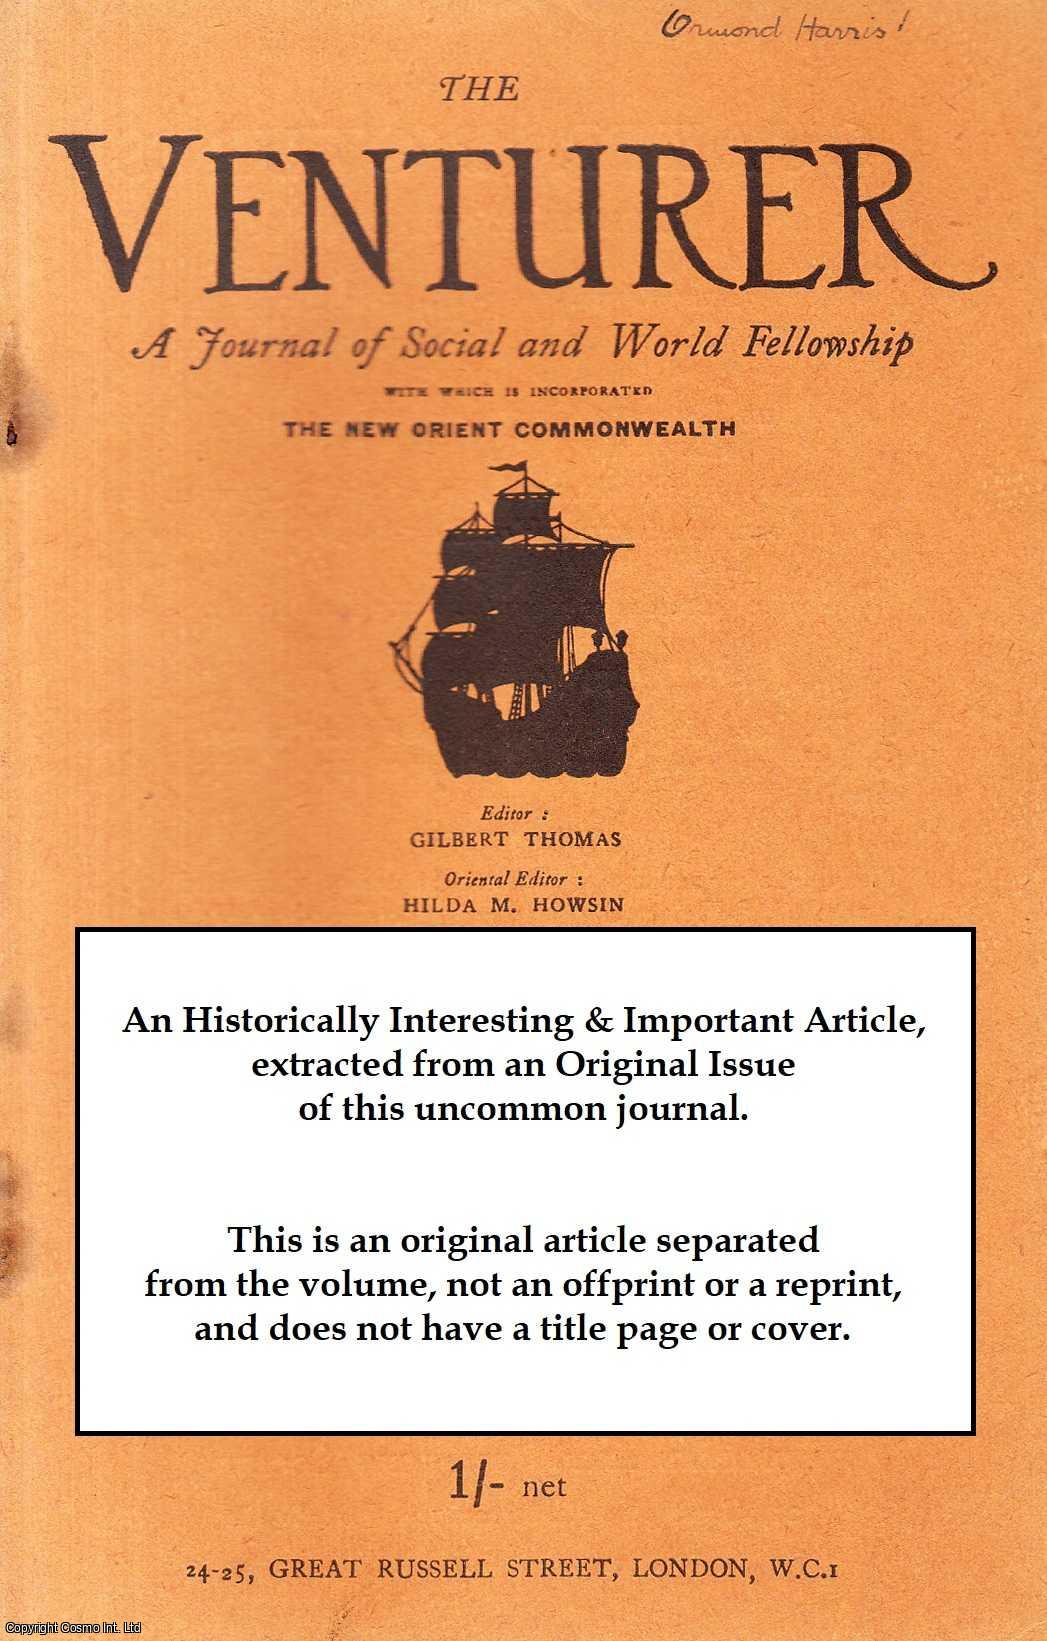 H.M. Howsin - Islam and the Entente. An original article from The Venturer, a Journal of Social and World Fellowship, 1920.